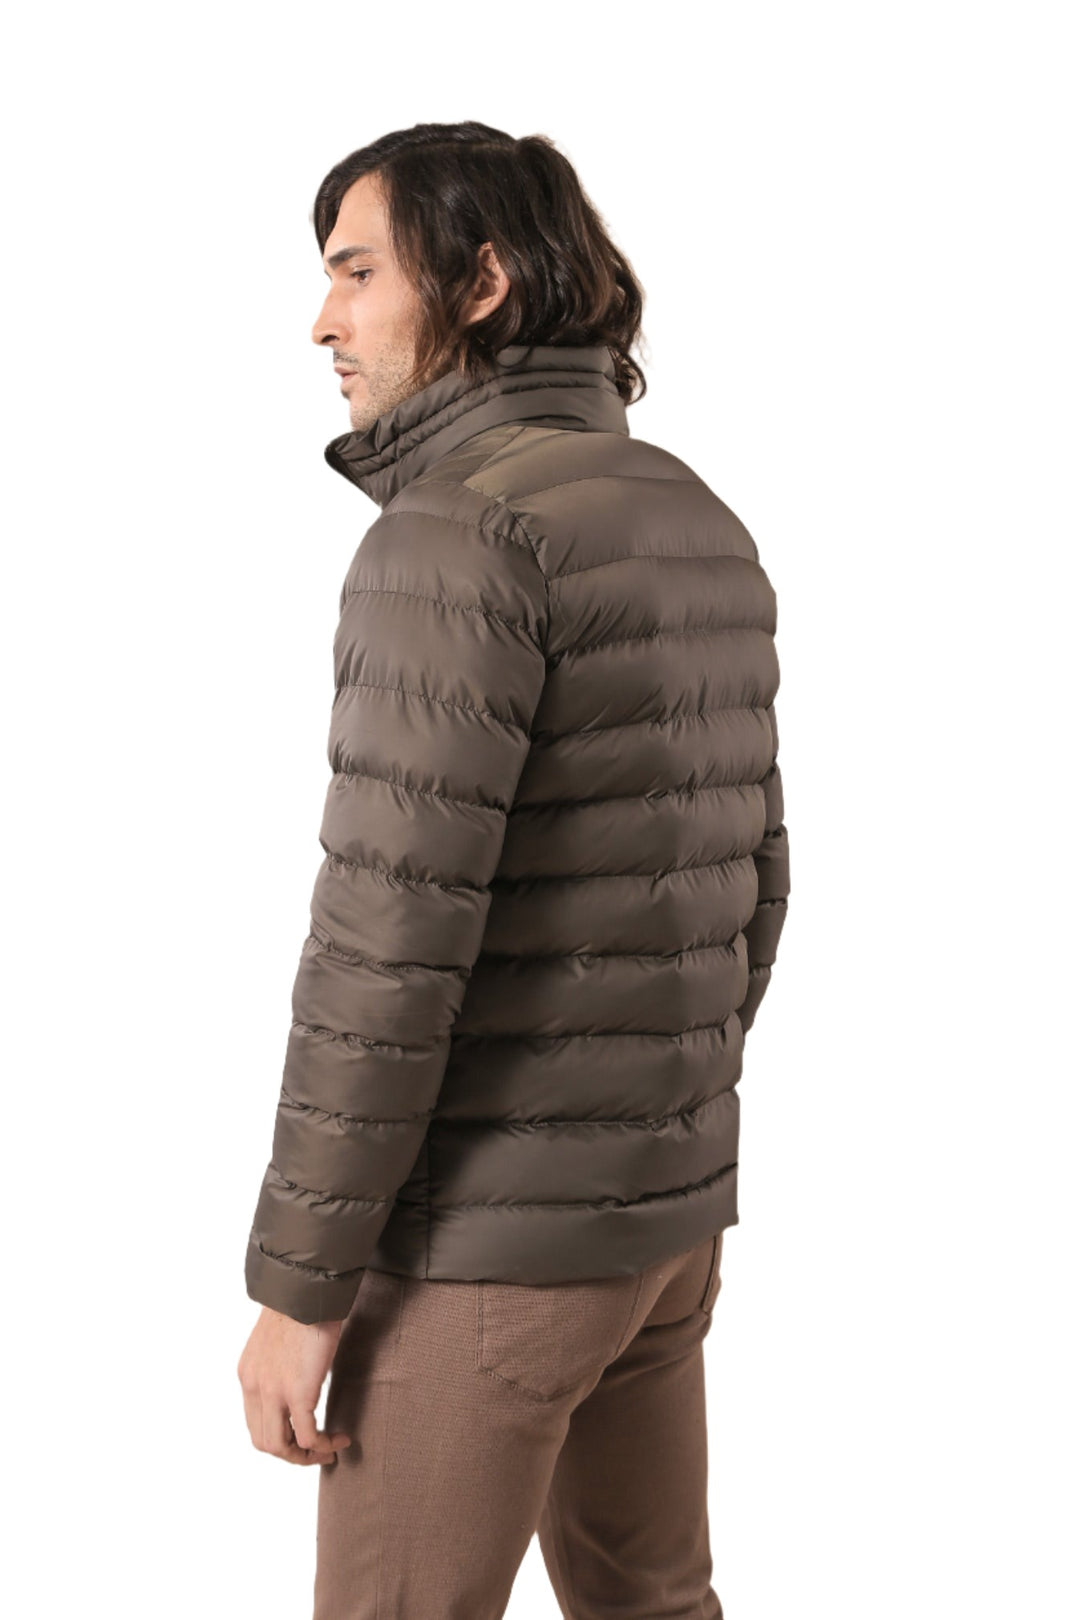 Quilted Standing Collar 2 Pockets Short Khaki Men Down Coat - Wessi